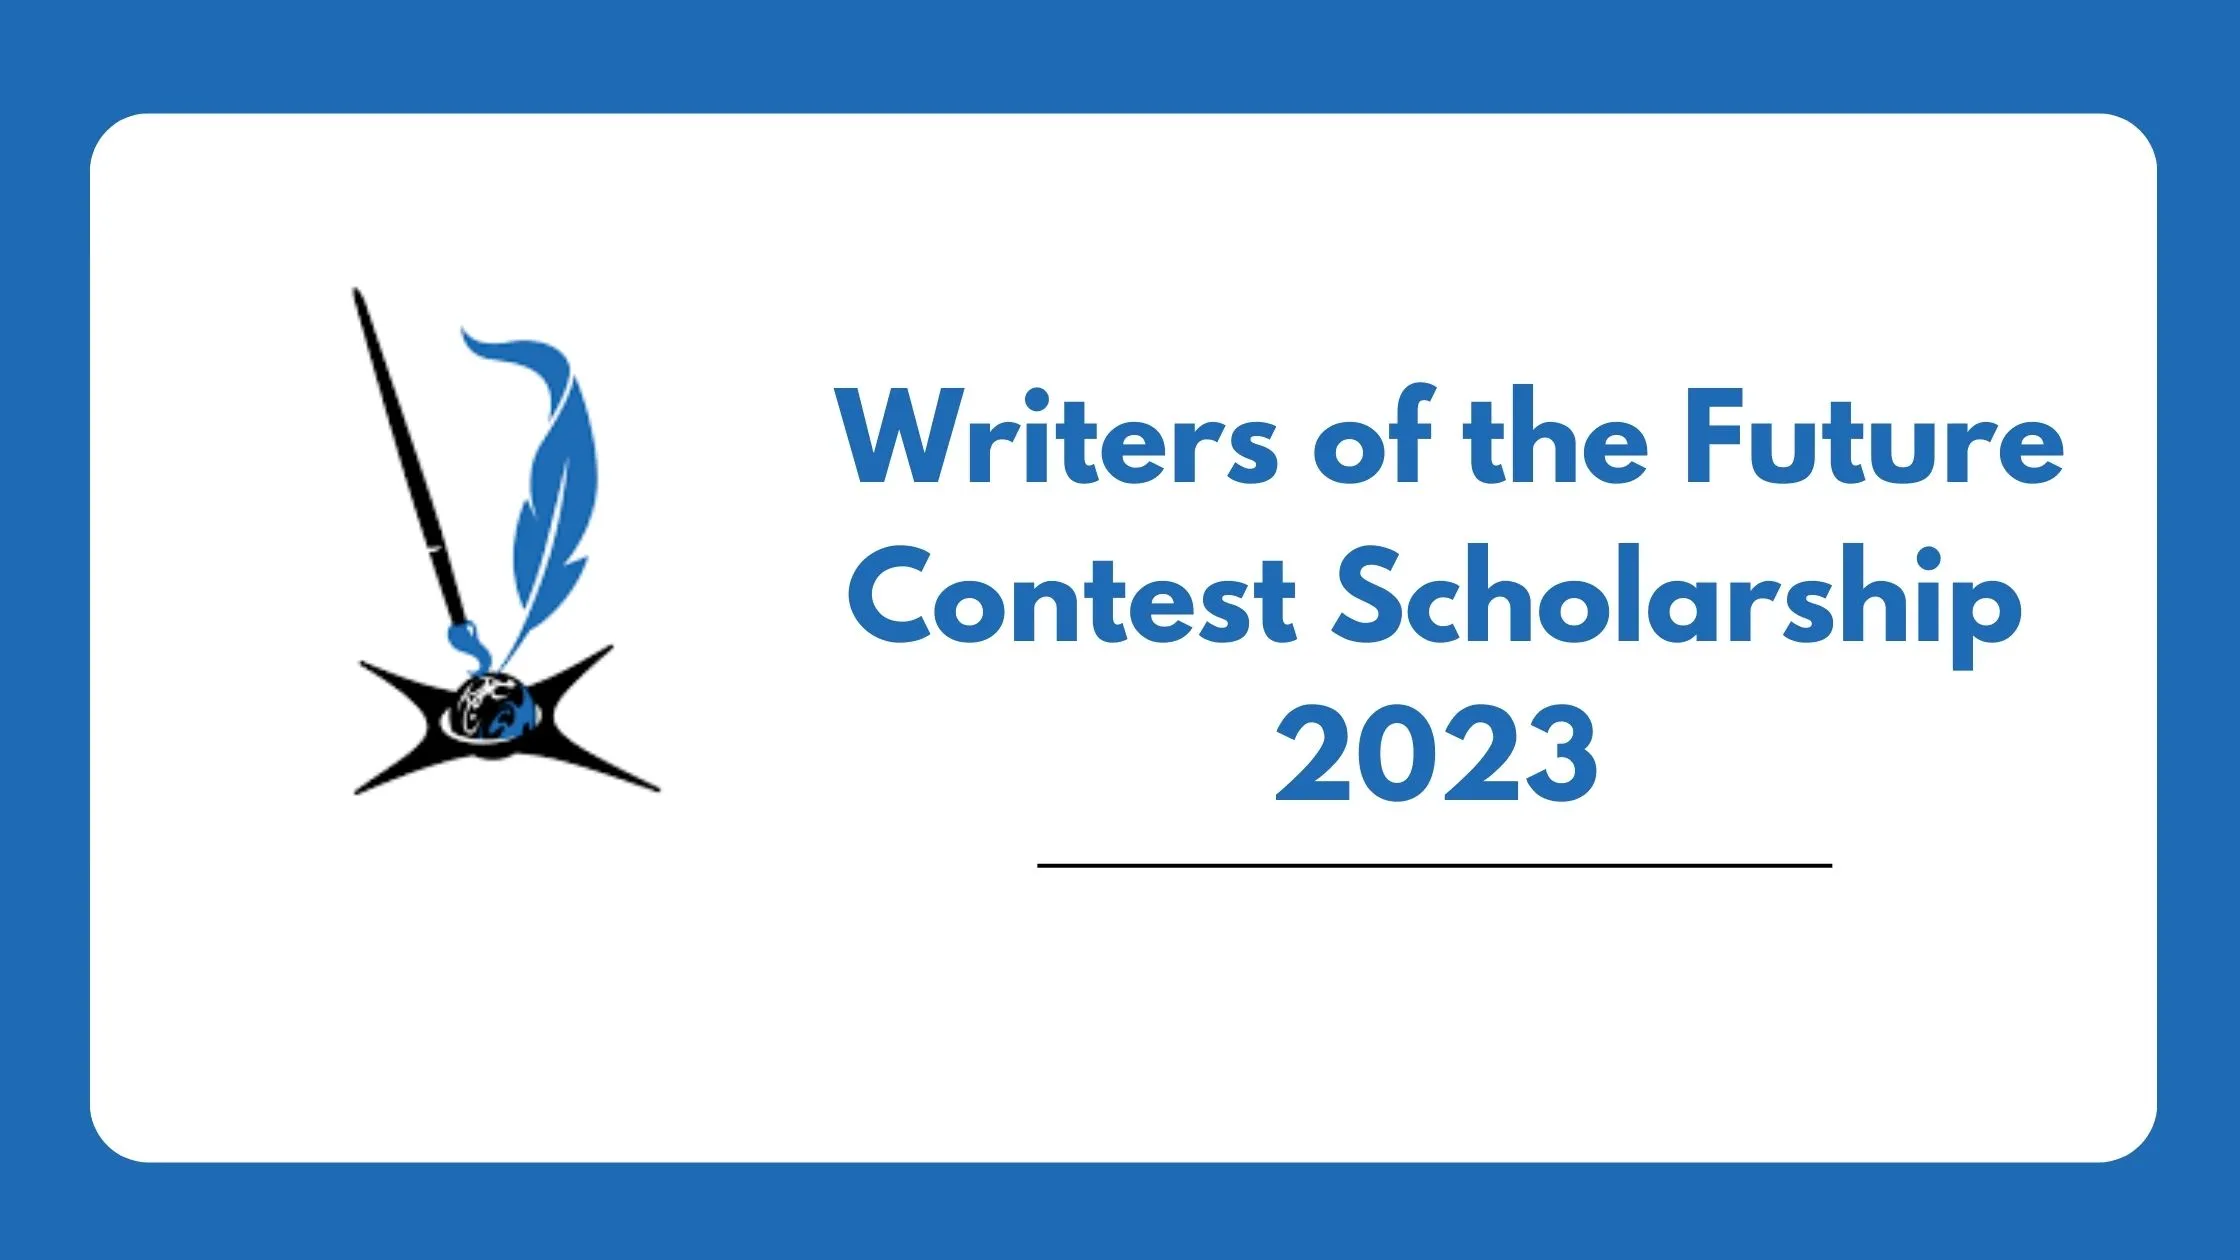 Writers of the Future Contest Scholarship 2023